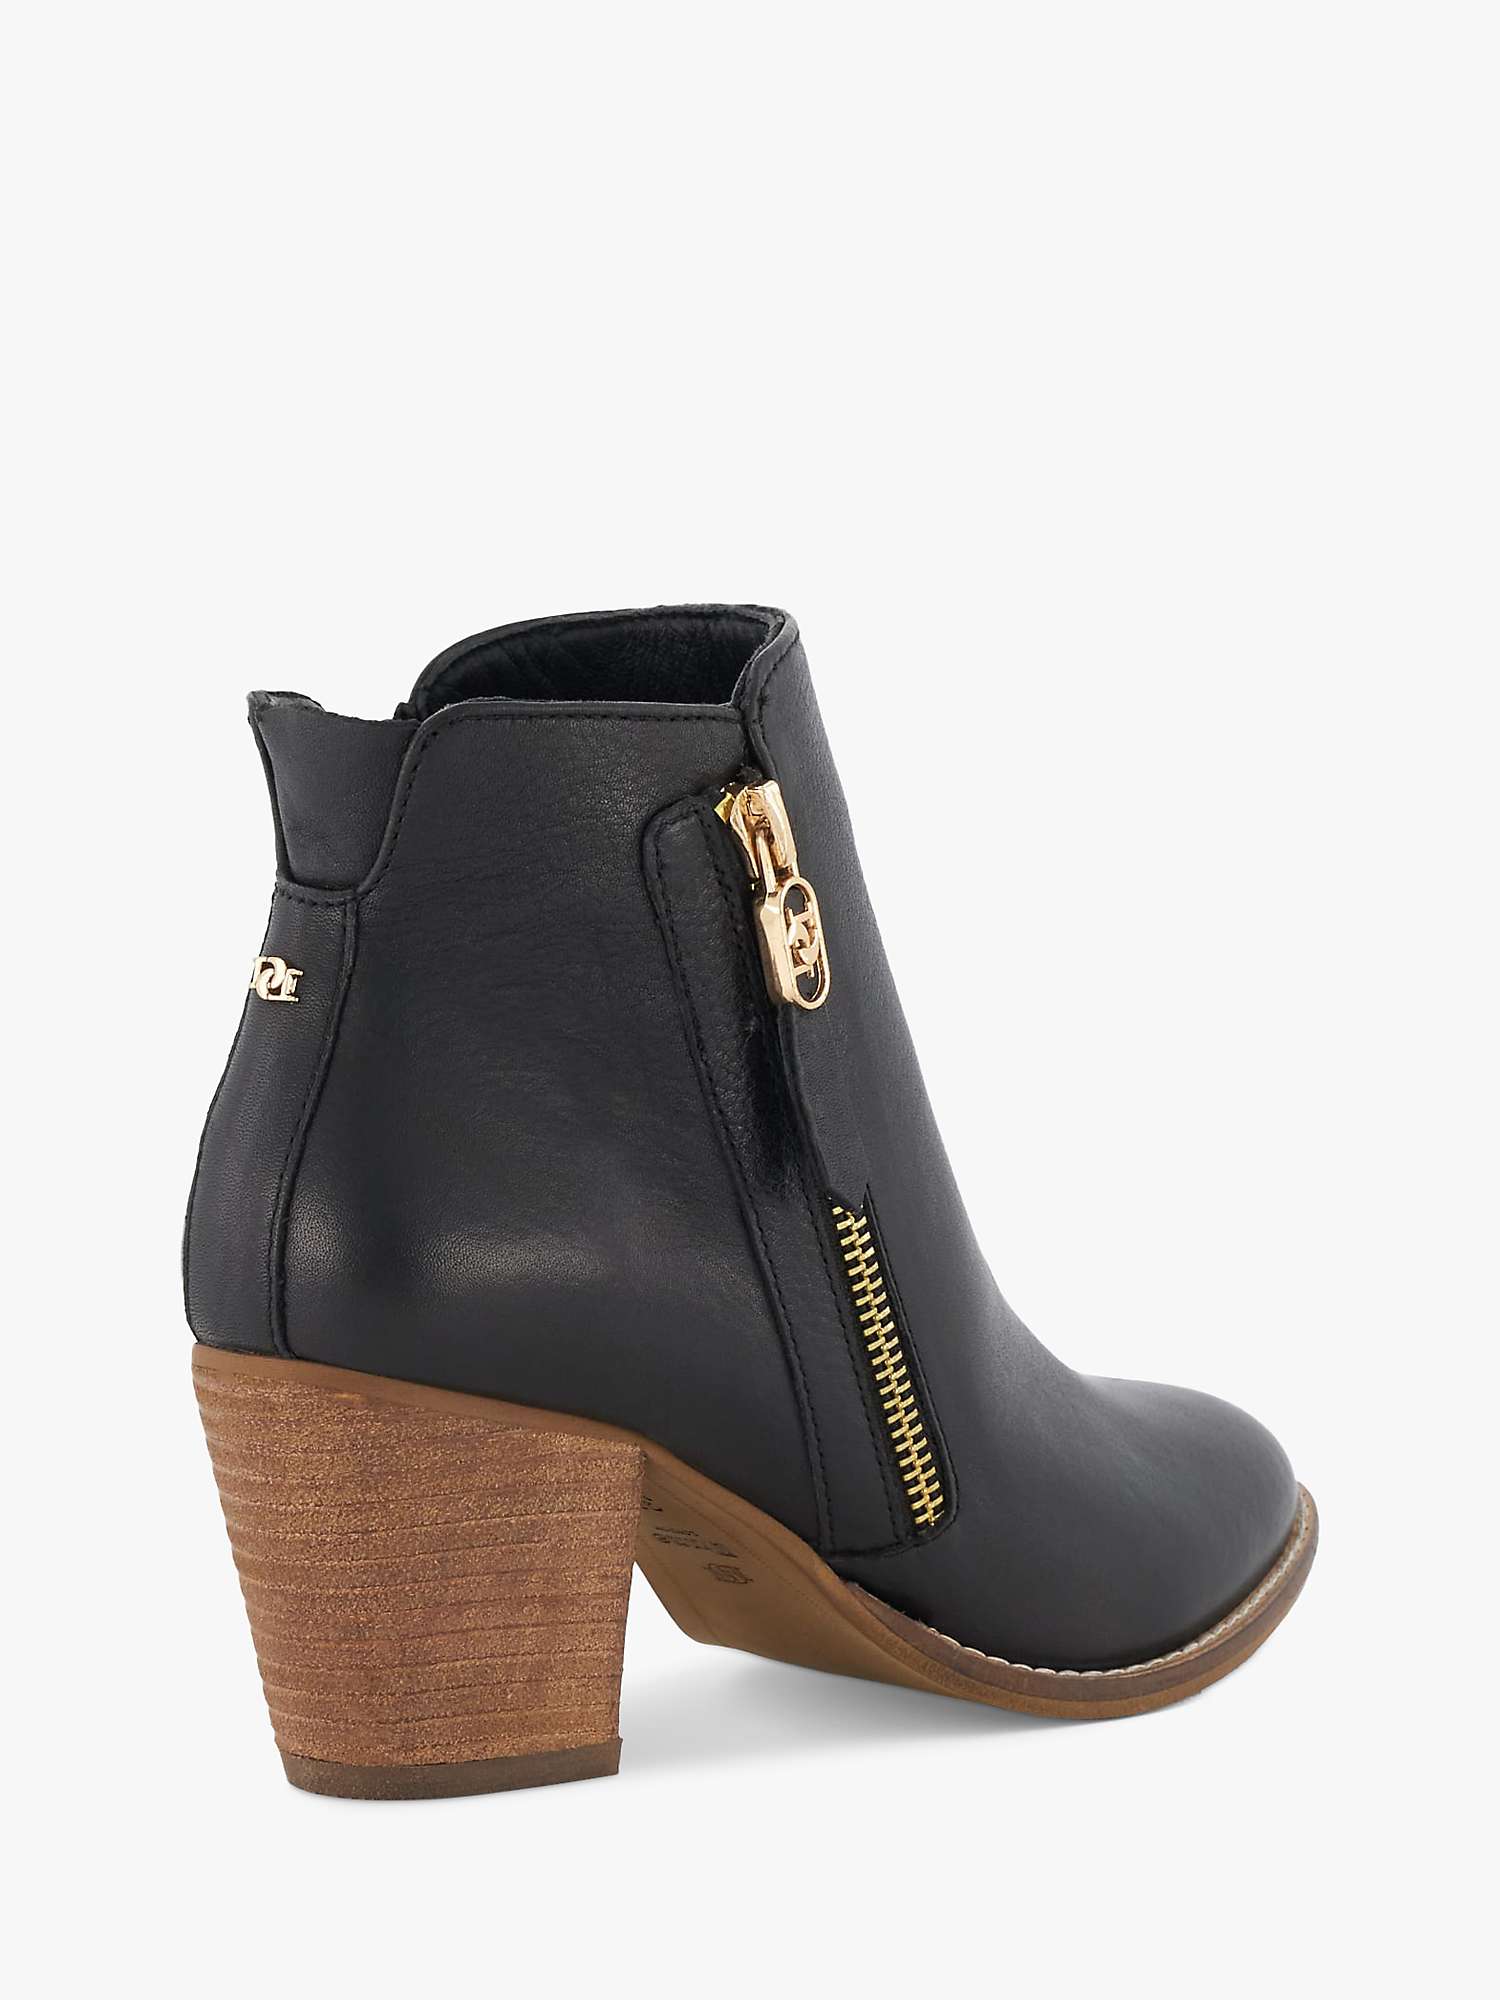 Buy Dune Paicey Leather Ankle Boots Online at johnlewis.com